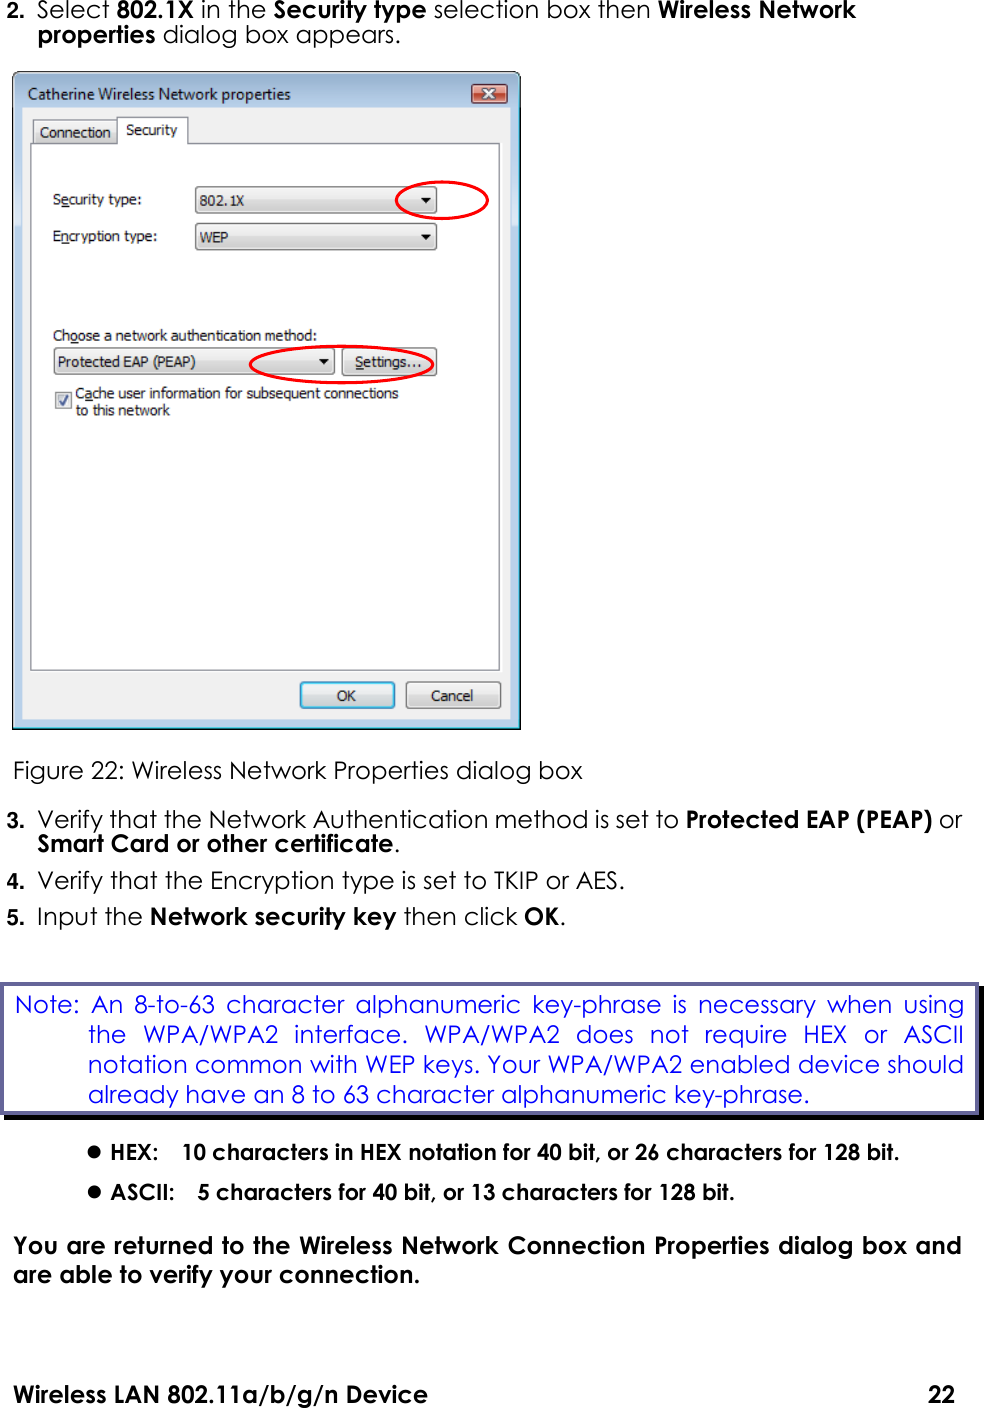 Wireless LAN 802.11a/b/g/n Device                                                                                  22 2. Select 802.1X in the Security type selection box then Wireless Network properties dialog box appears.    Figure 22: Wireless Network Properties dialog box 3. Verify that the Network Authentication method is set to Protected EAP (PEAP) or Smart Card or other certificate. 4. Verify that the Encryption type is set to TKIP or AES. 5. Input the Network security key then click OK.  HEX:    10 characters in HEX notation for 40 bit, or 26 characters for 128 bit.  ASCII:    5 characters for 40 bit, or 13 characters for 128 bit. You are returned to the Wireless Network Connection Properties dialog box and are able to verify your connection.  Note:  An  8-to-63  character  alphanumeric  key-phrase  is  necessary  when  using the  WPA/WPA2  interface.  WPA/WPA2  does  not  require  HEX  or  ASCII notation common with WEP keys. Your WPA/WPA2 enabled device should already have an 8 to 63 character alphanumeric key-phrase.   